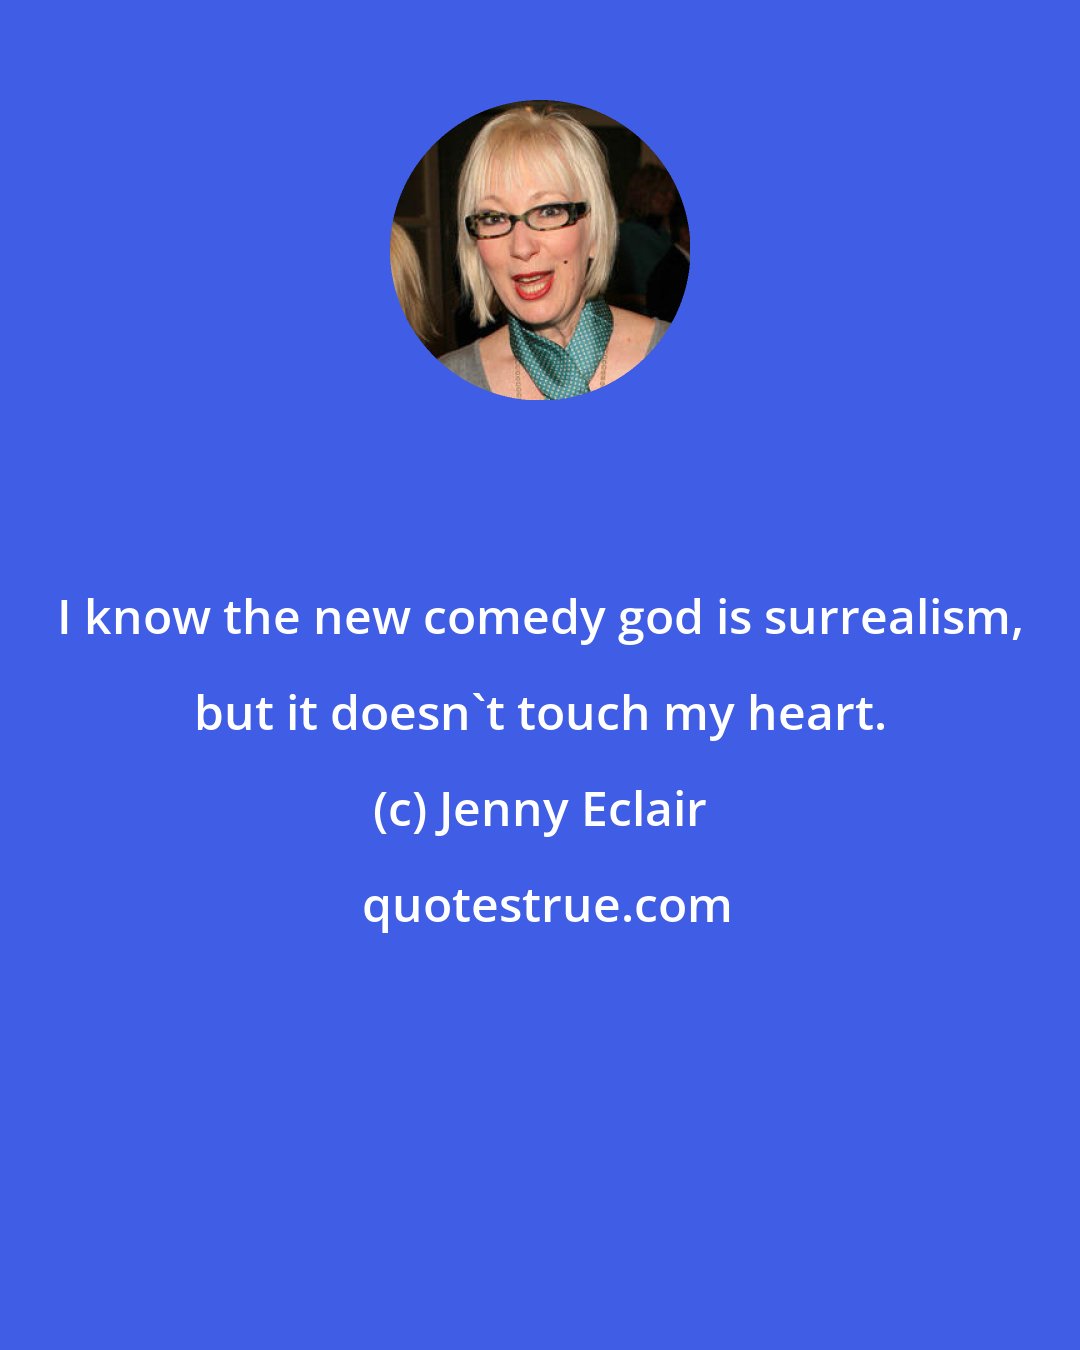 Jenny Eclair: I know the new comedy god is surrealism, but it doesn't touch my heart.